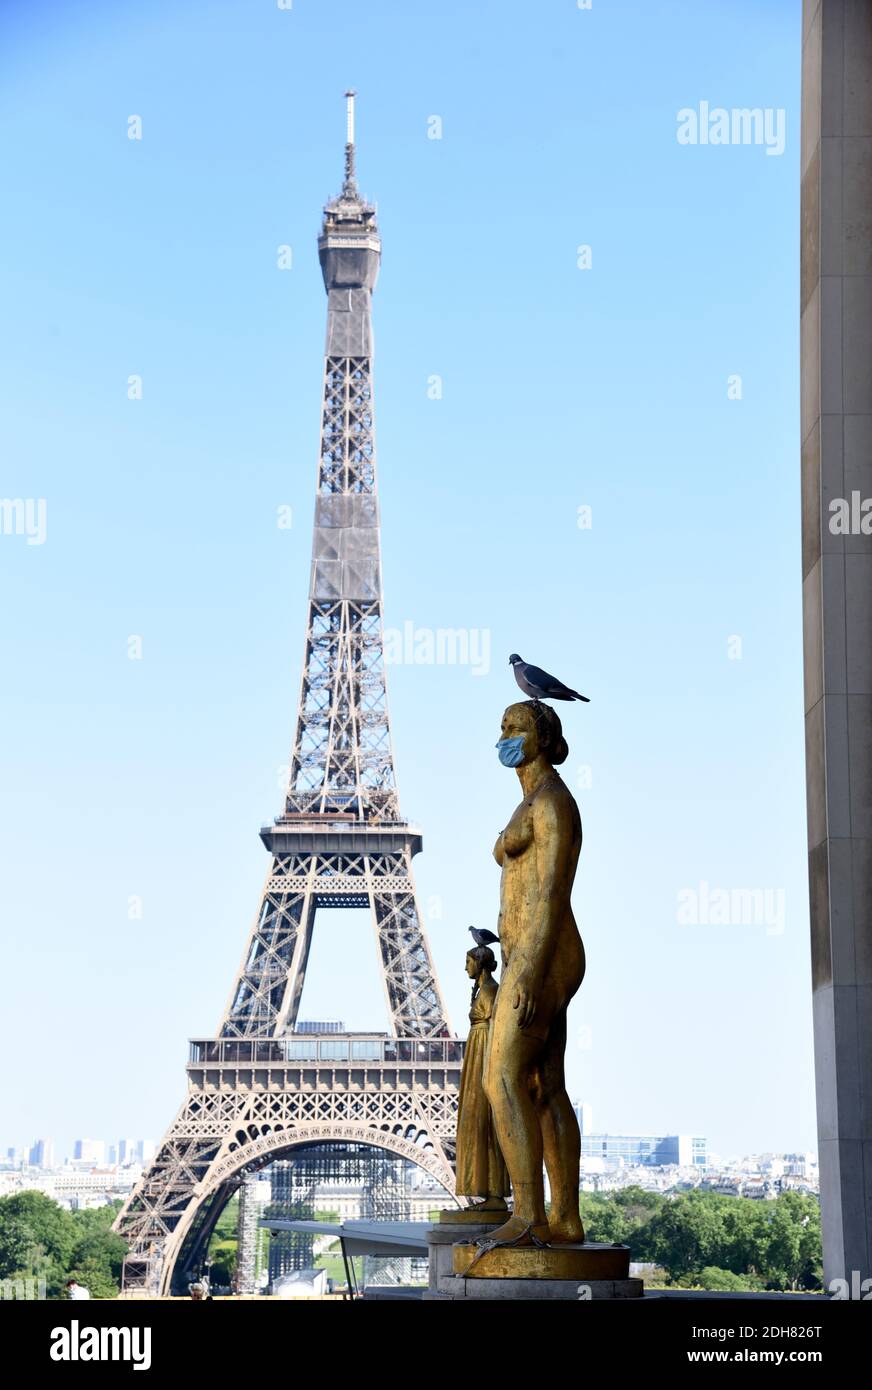 Paris (France) on May 17, 2020: statue in "Place du Trocadero" square with a protective mask against Coronavirus, Covid19, and the Eiffel Tower in the Stock Photo